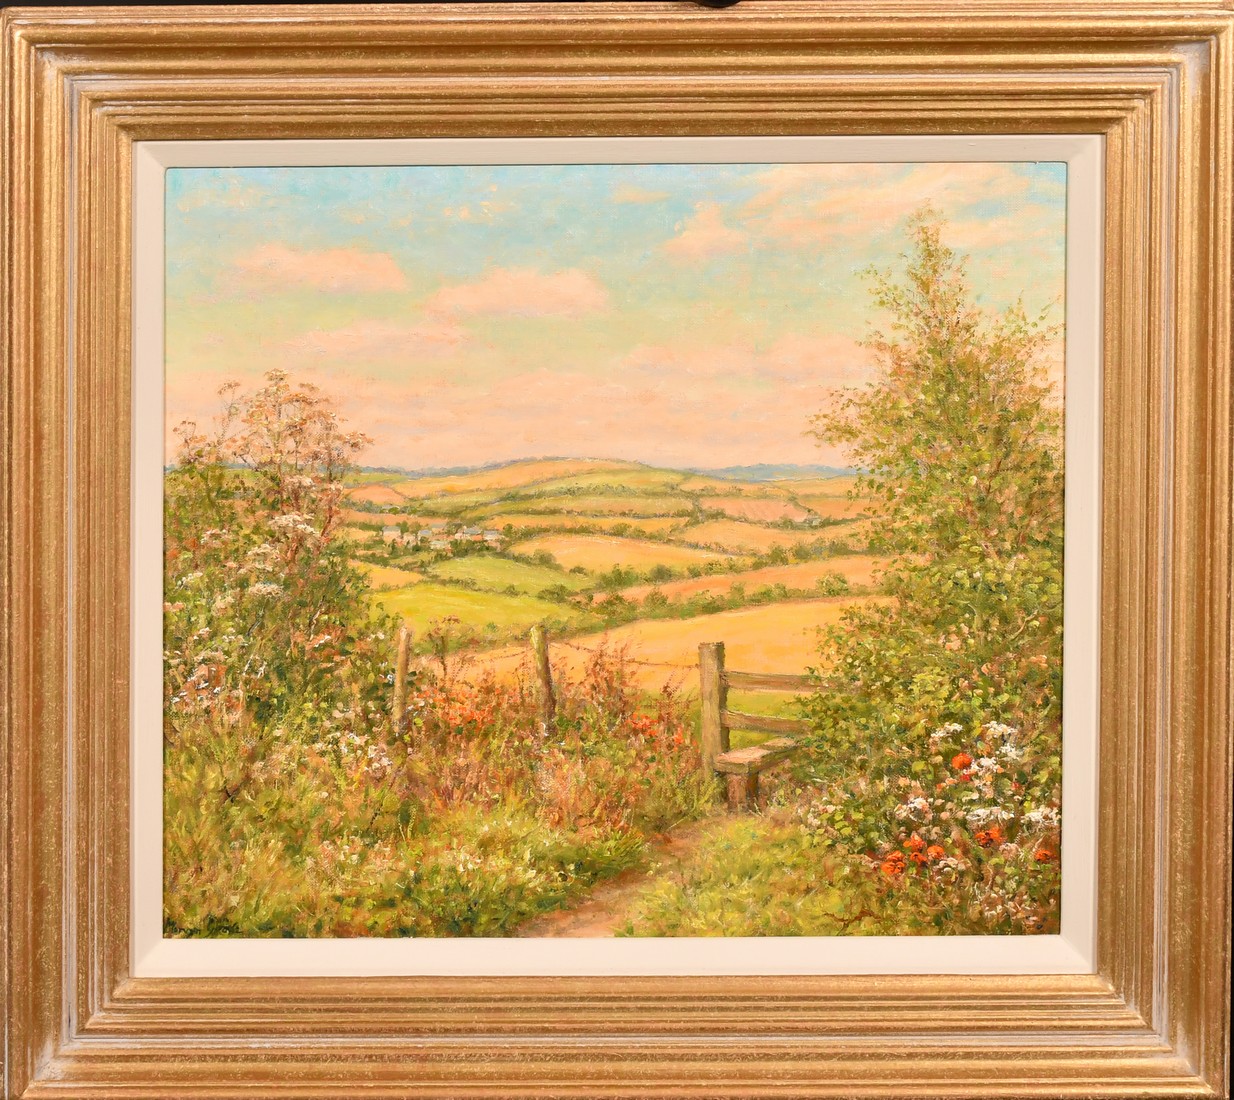 Mervyn Goode, 'Stile and Patchwork Fields, Midsummer', oil on canvas, signed, 14" x 16" (36 x - Image 2 of 4